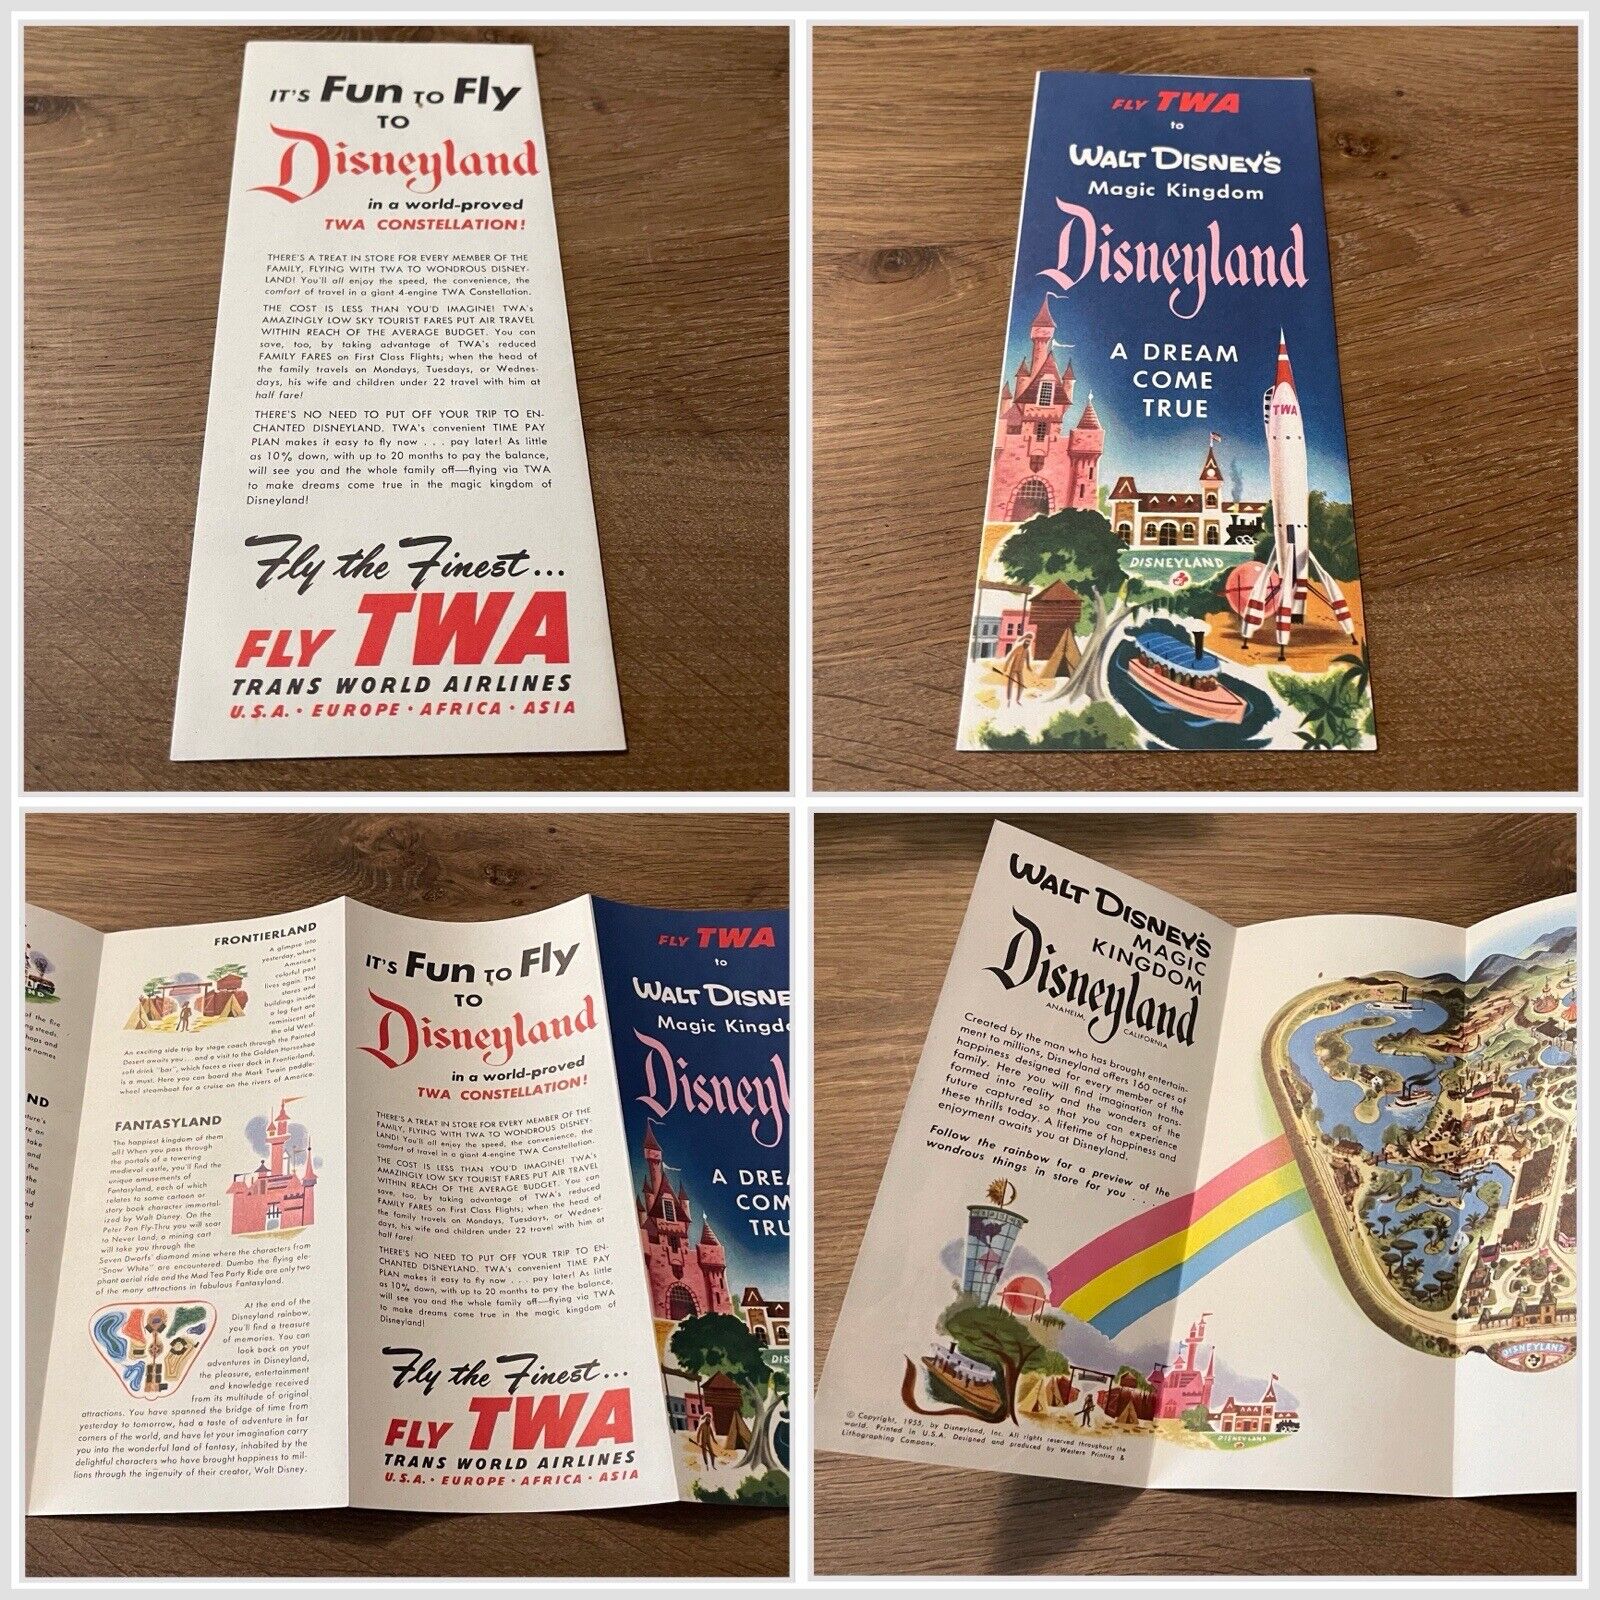 1955 Disneyland Booklet Fly Twa - A Dream Come True - Extremely Rare Condition